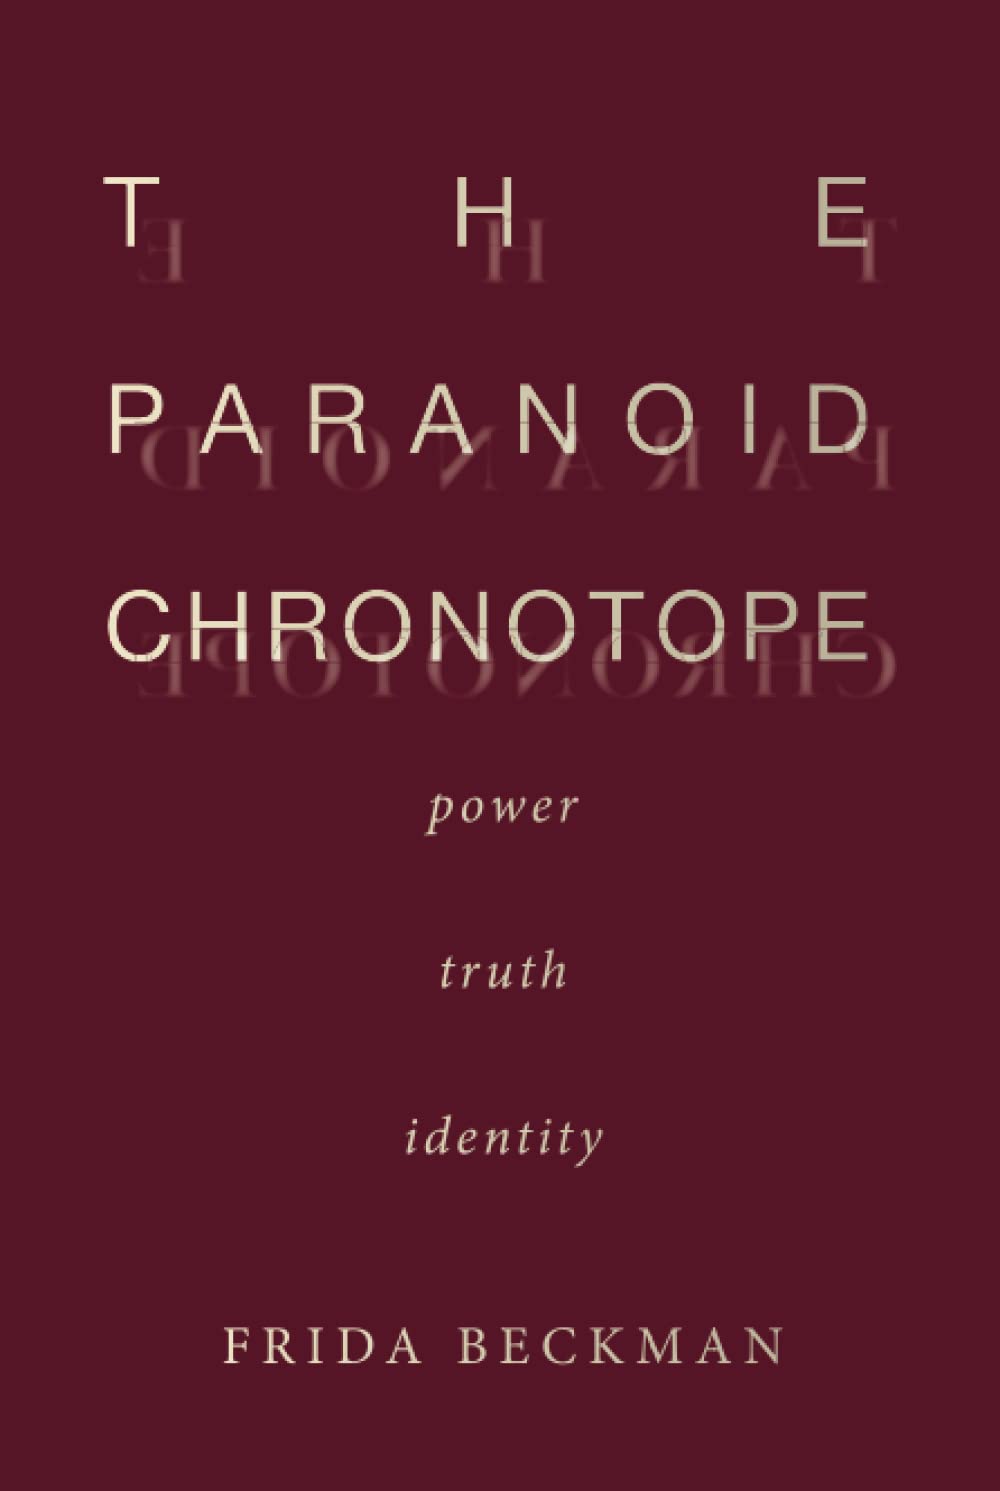  The Paranoid Chronotope